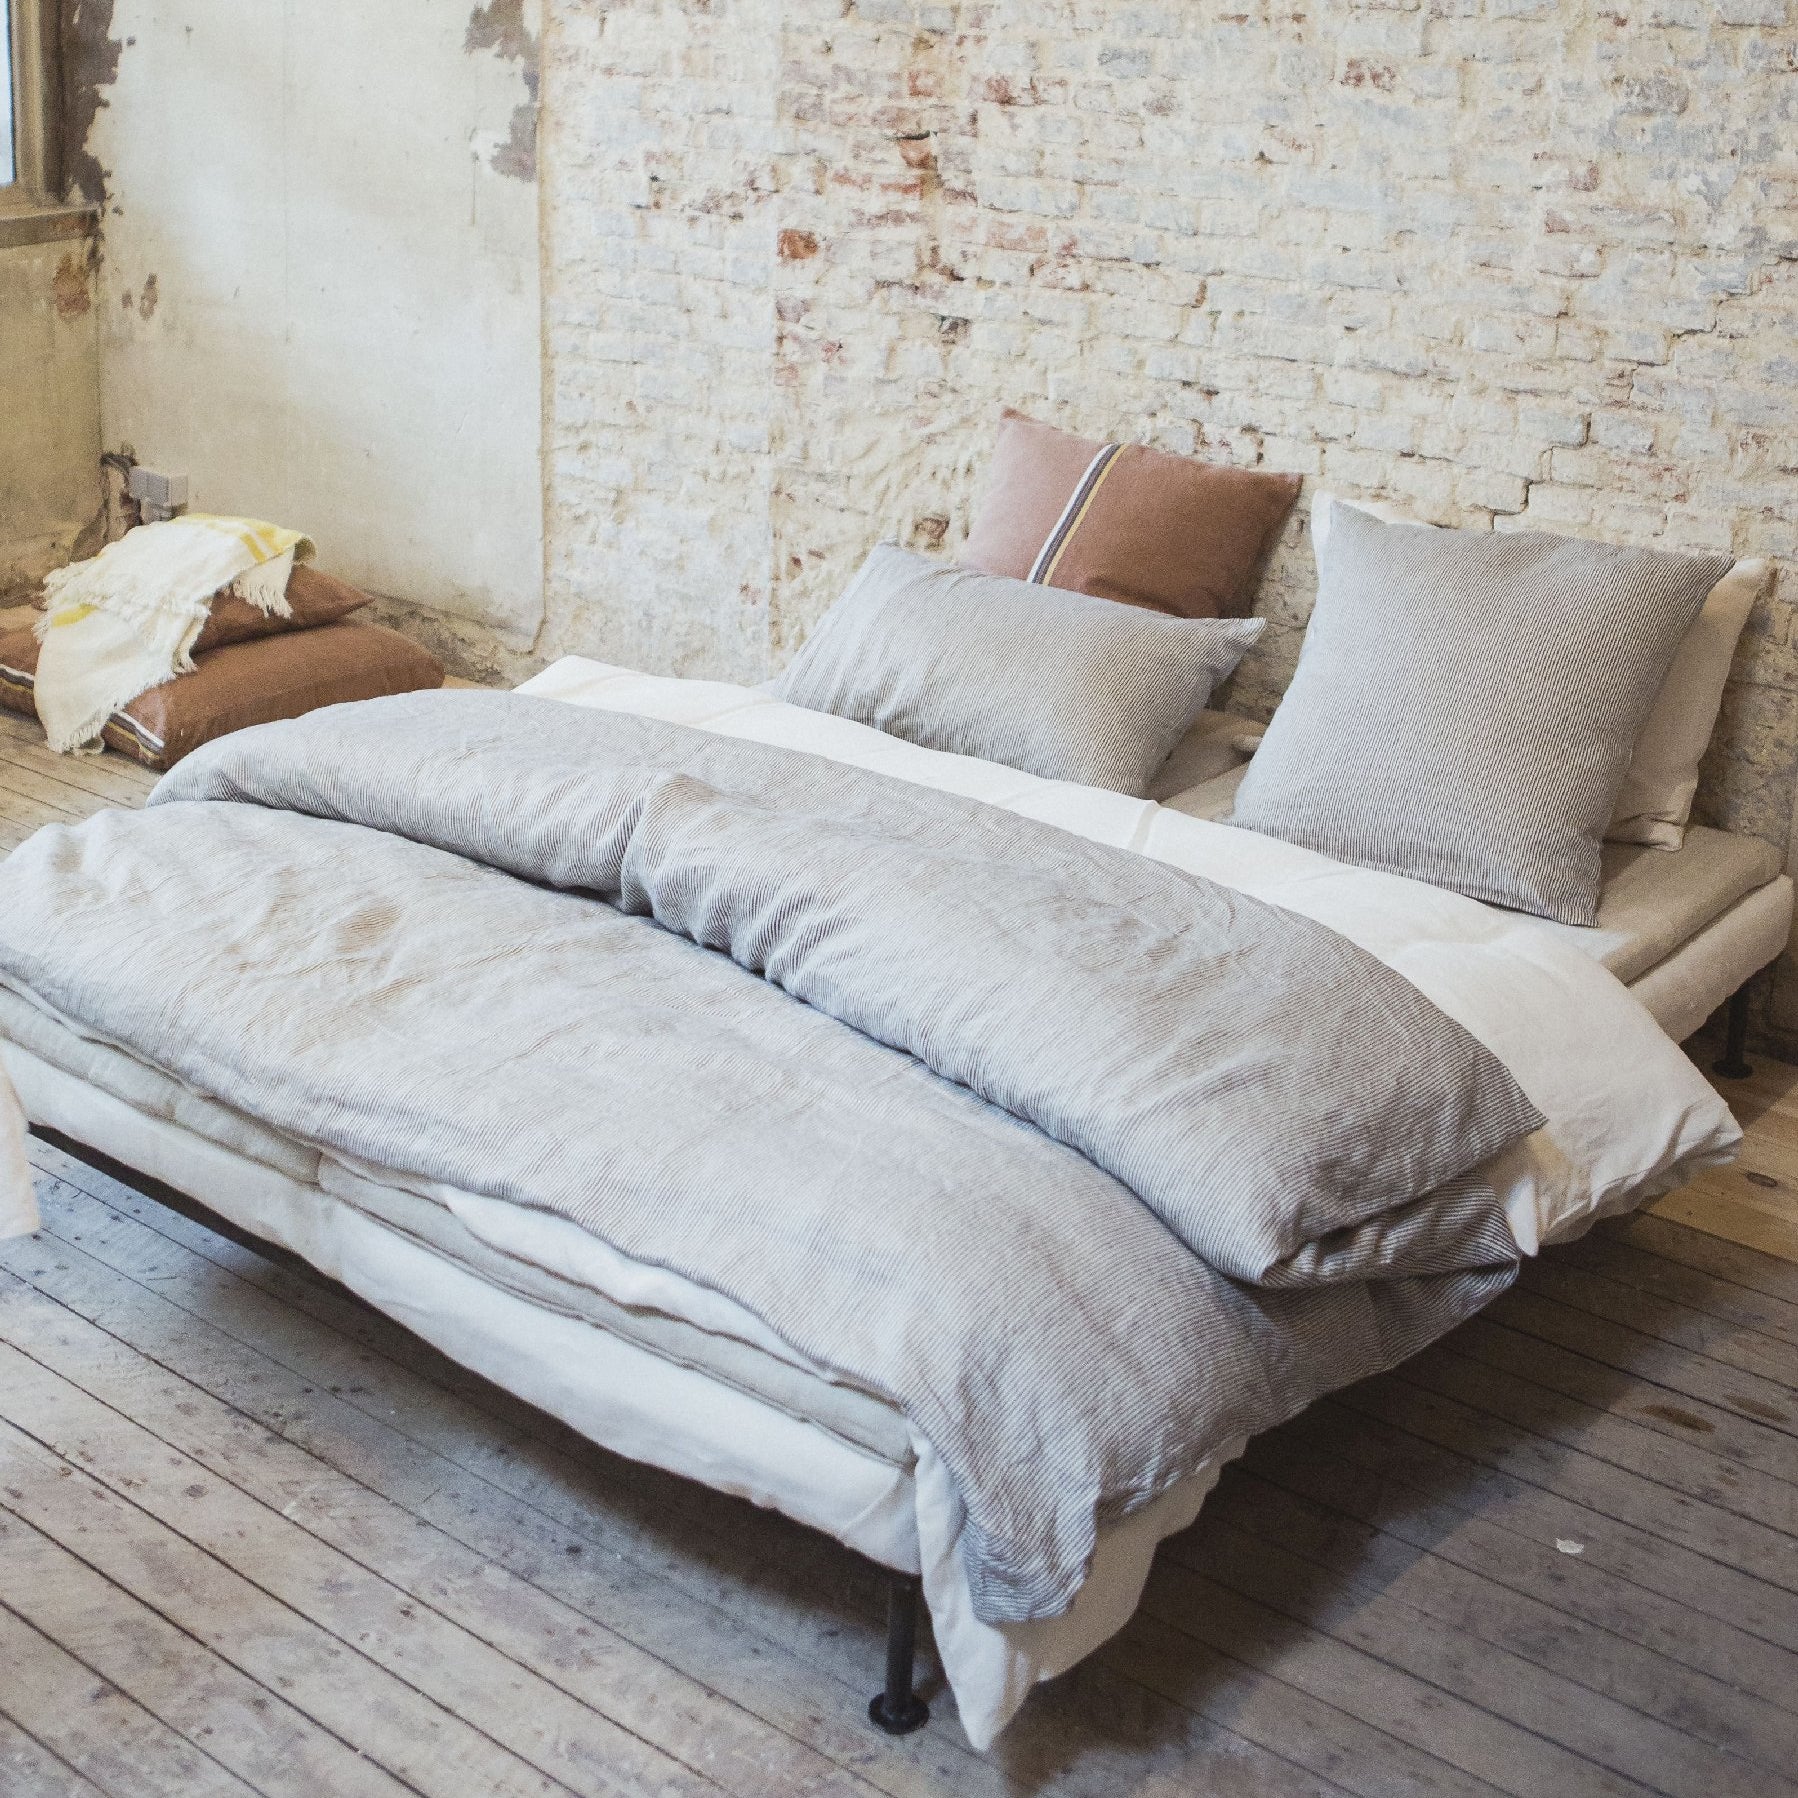 the workshop stripe duvet cover by libeco on adorn.house